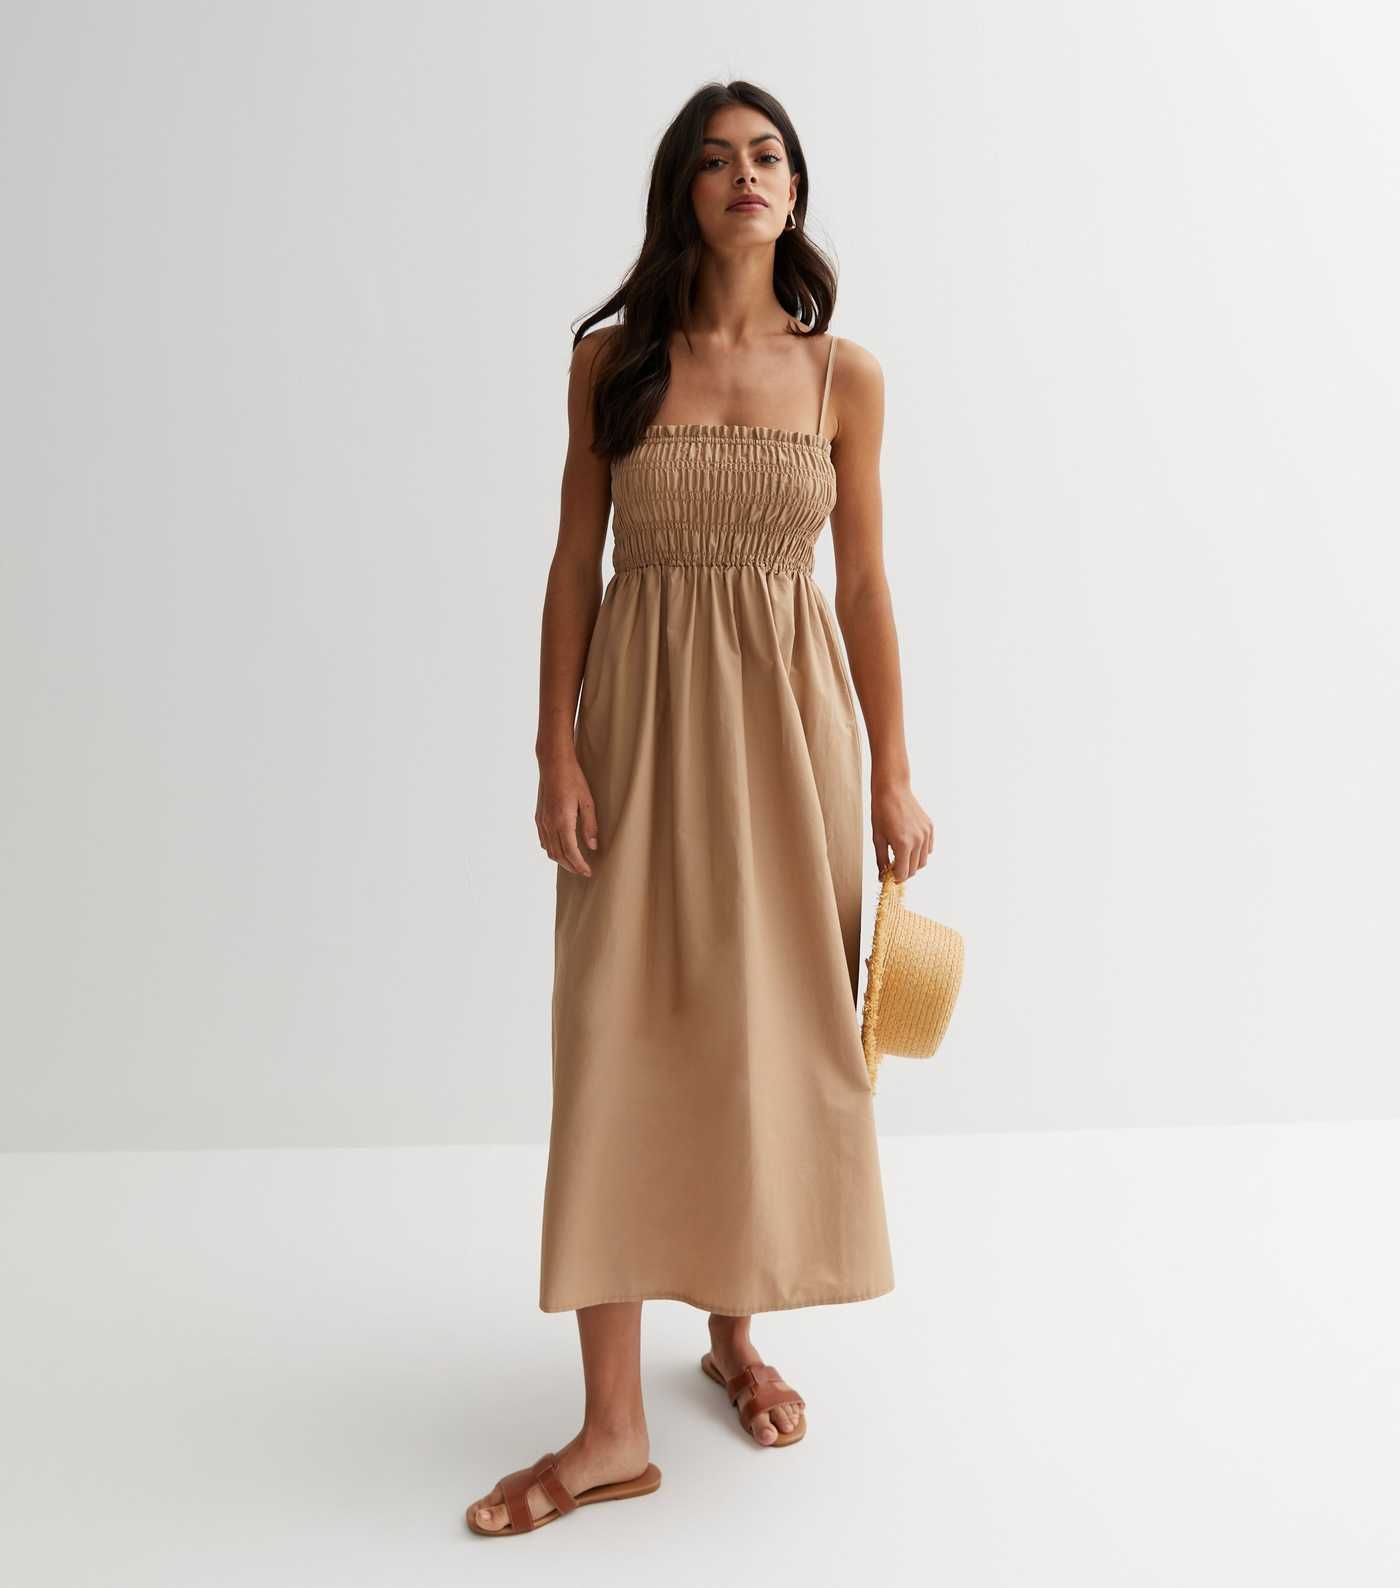 Stone Cotton Square Neck Strappy Midi Dress
						
						Add to Saved Items
						Remove from Sav... | New Look (UK)